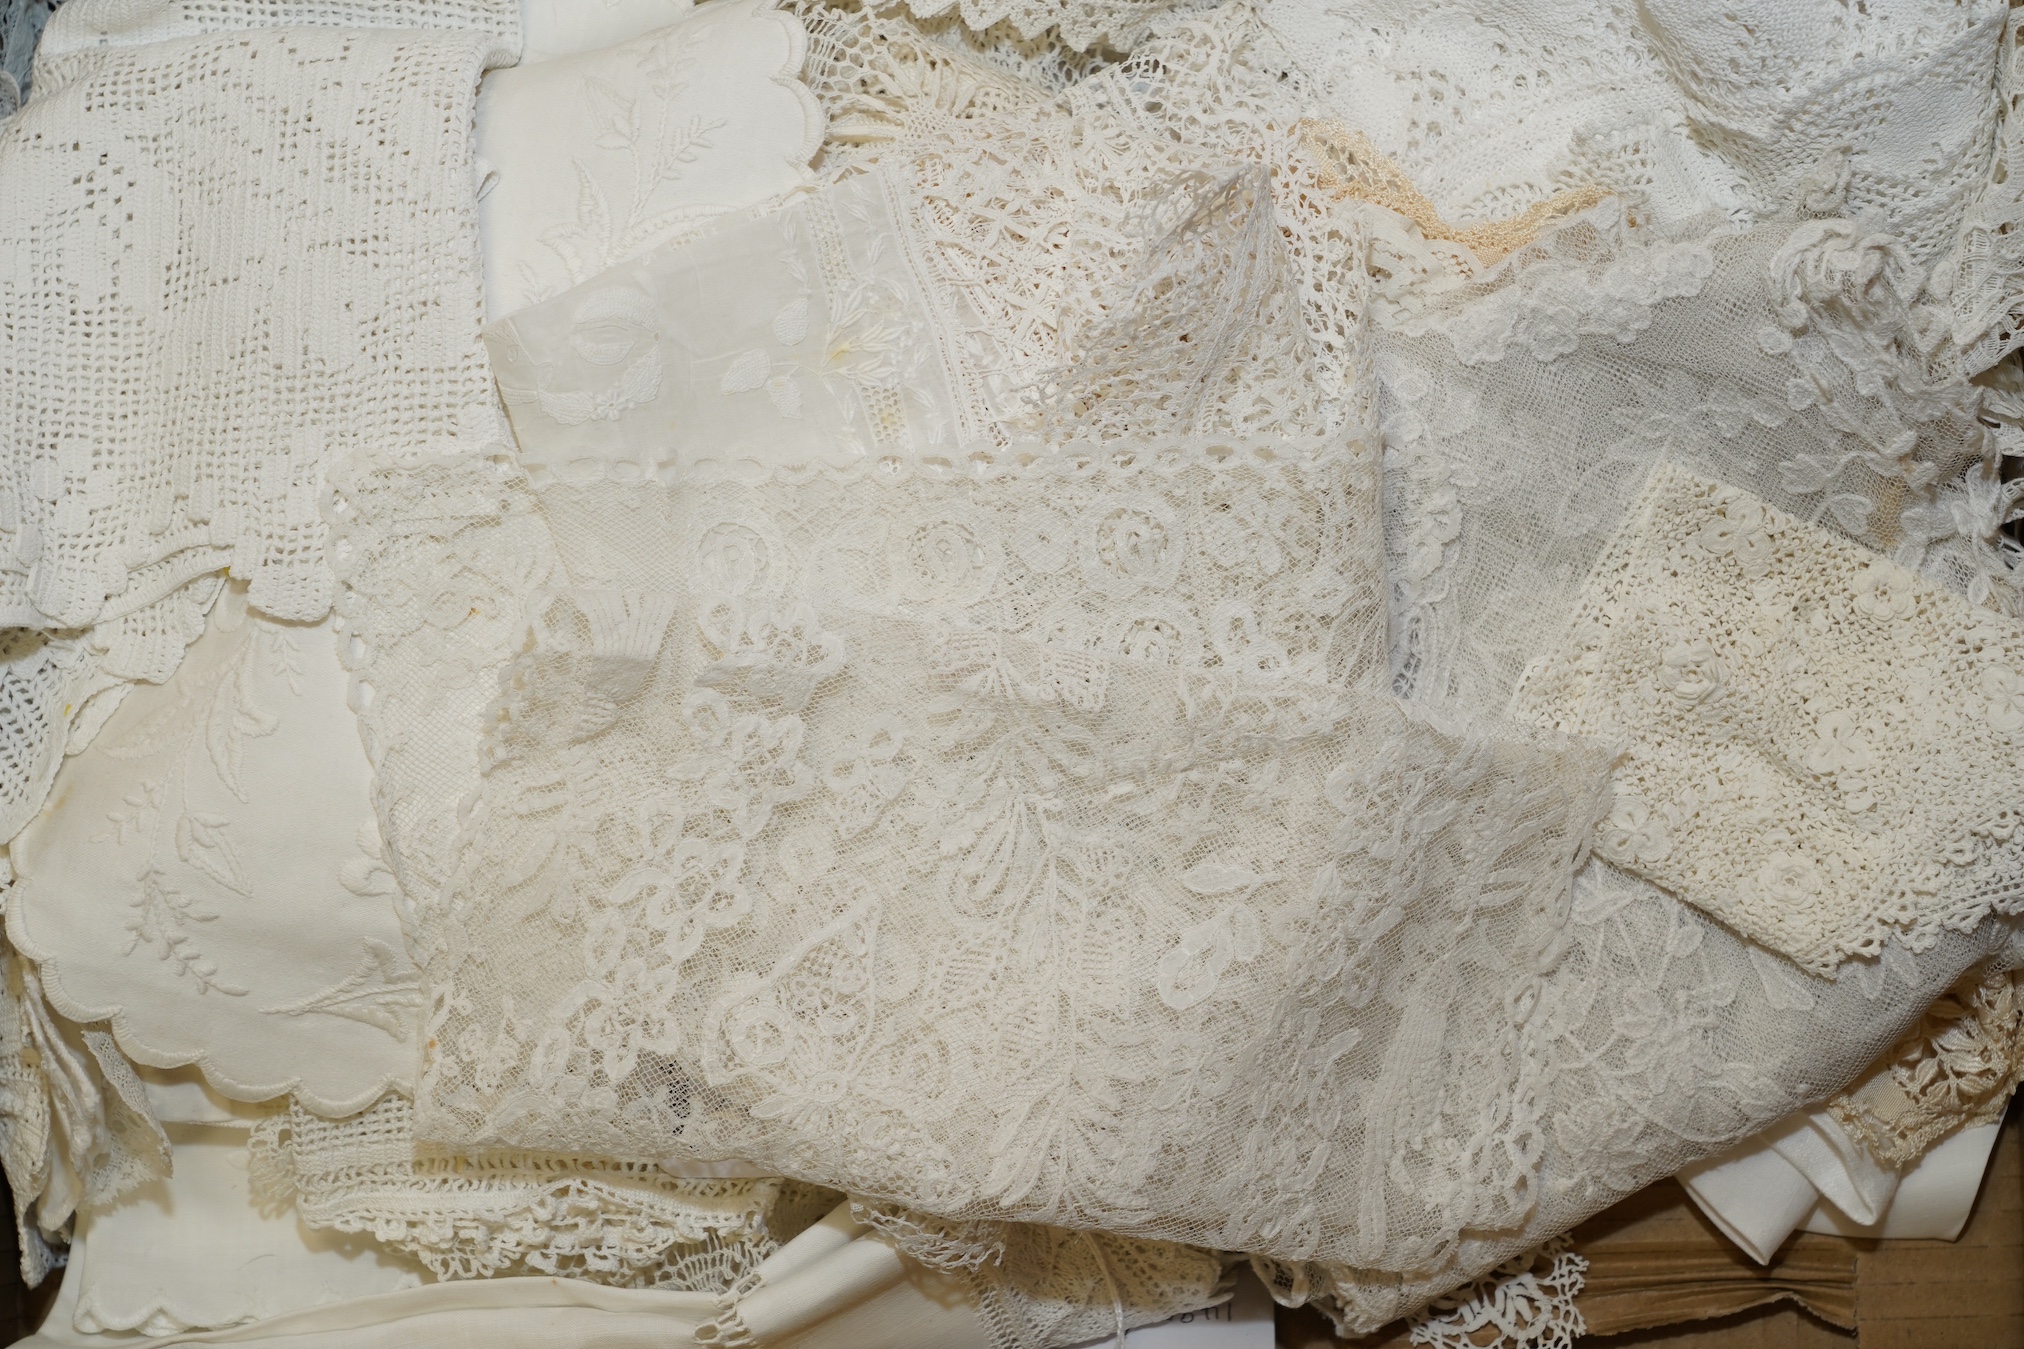 An early 20th century christening gown, a later crocheted cover, various bobbin lace collars, silk Maltese, Honiton, Irish crochet, etc., and a machine lace stole, crochet mats. Condition - all in good condition, launder